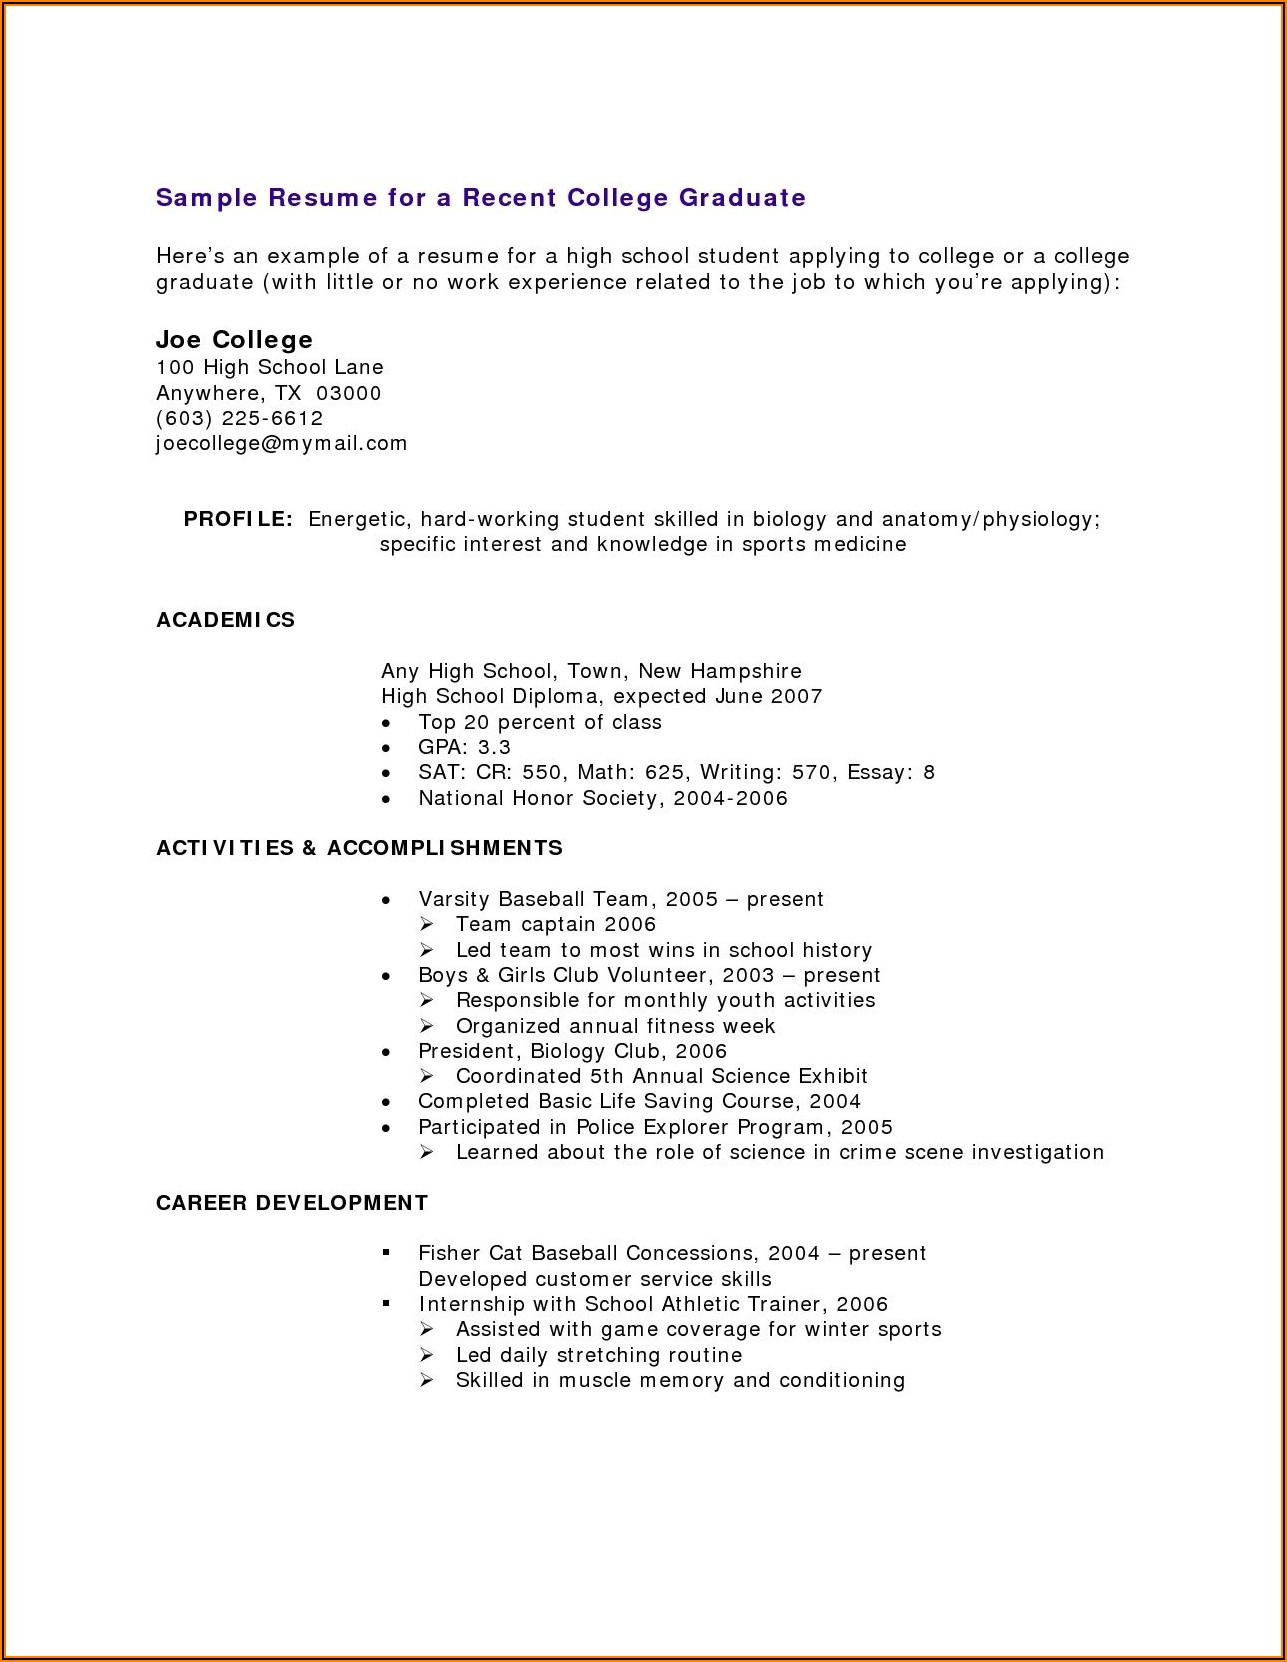 How To Write A Resume For High School Student With No Work Experience